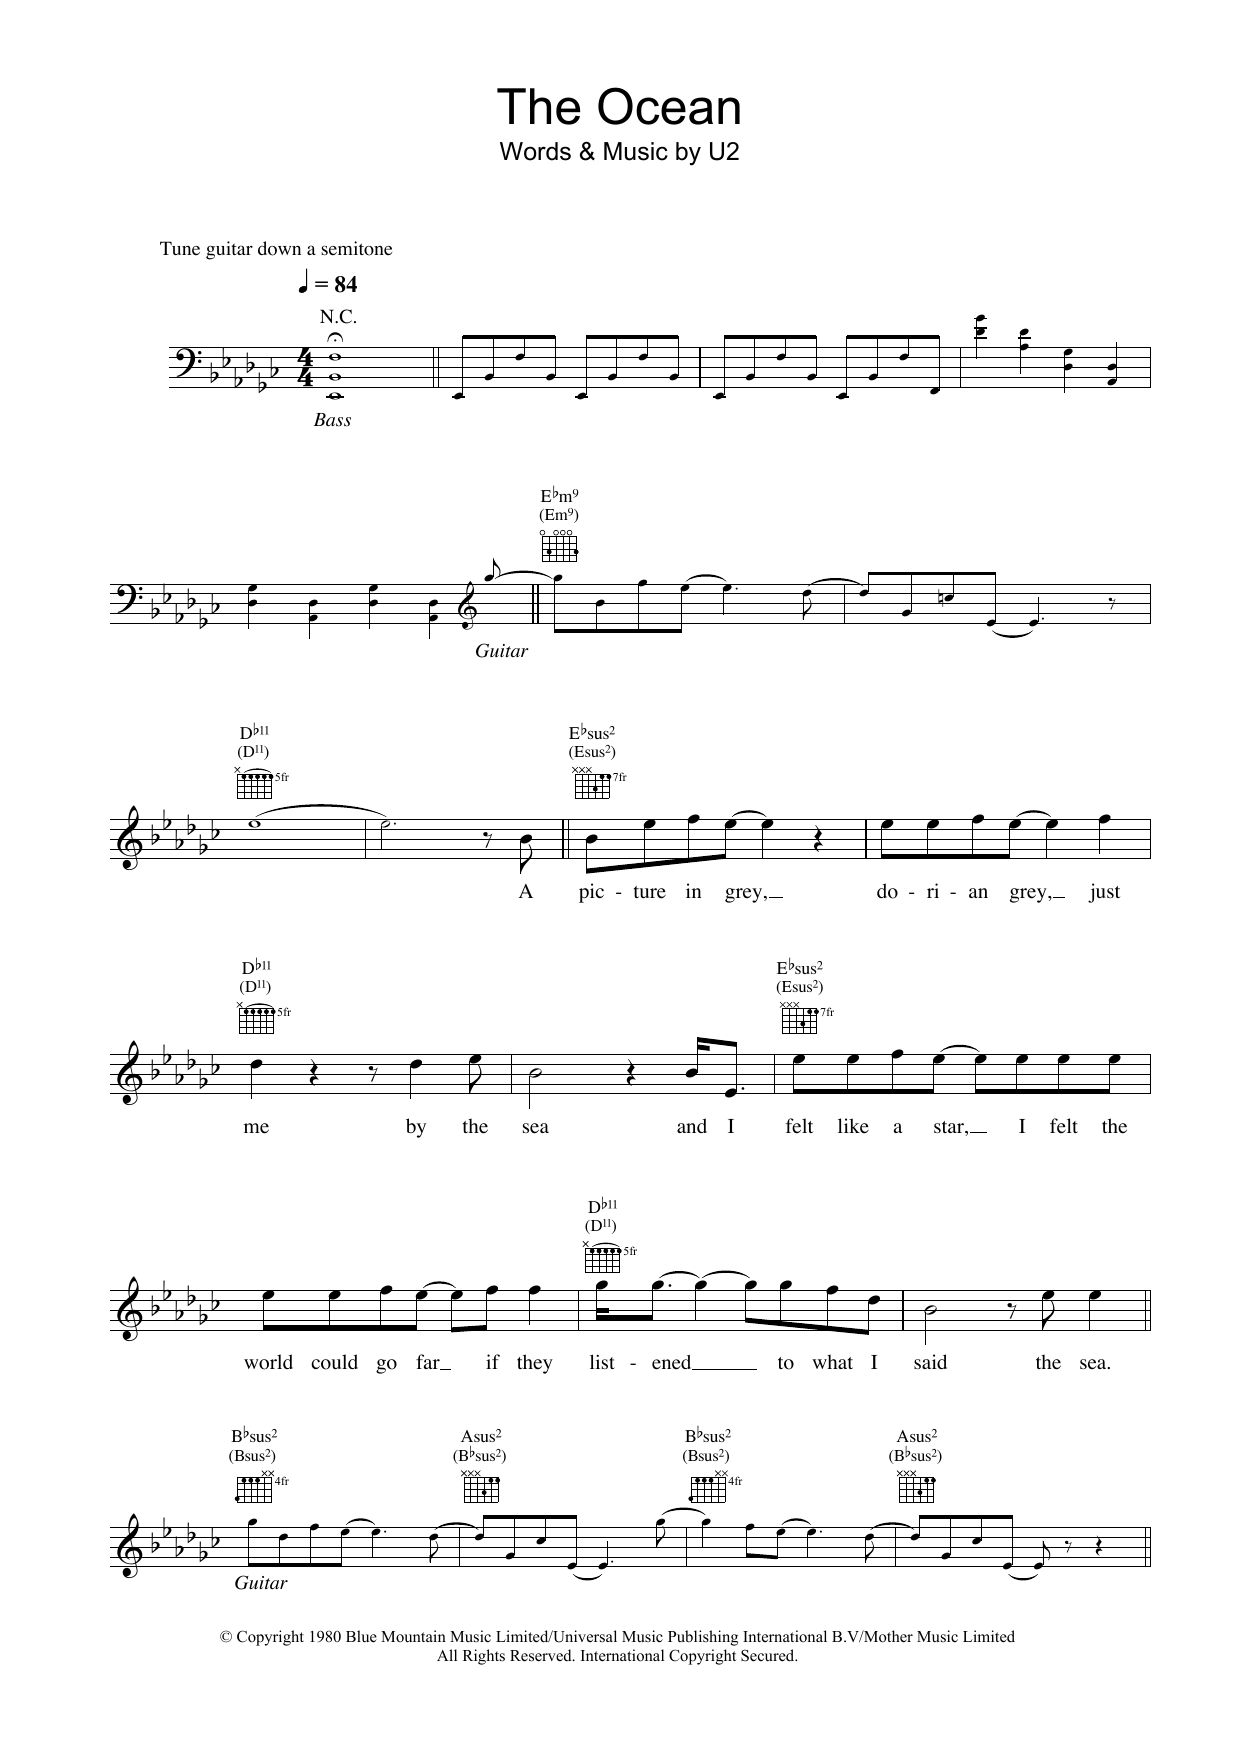 U2 The Ocean sheet music notes and chords. Download Printable PDF.